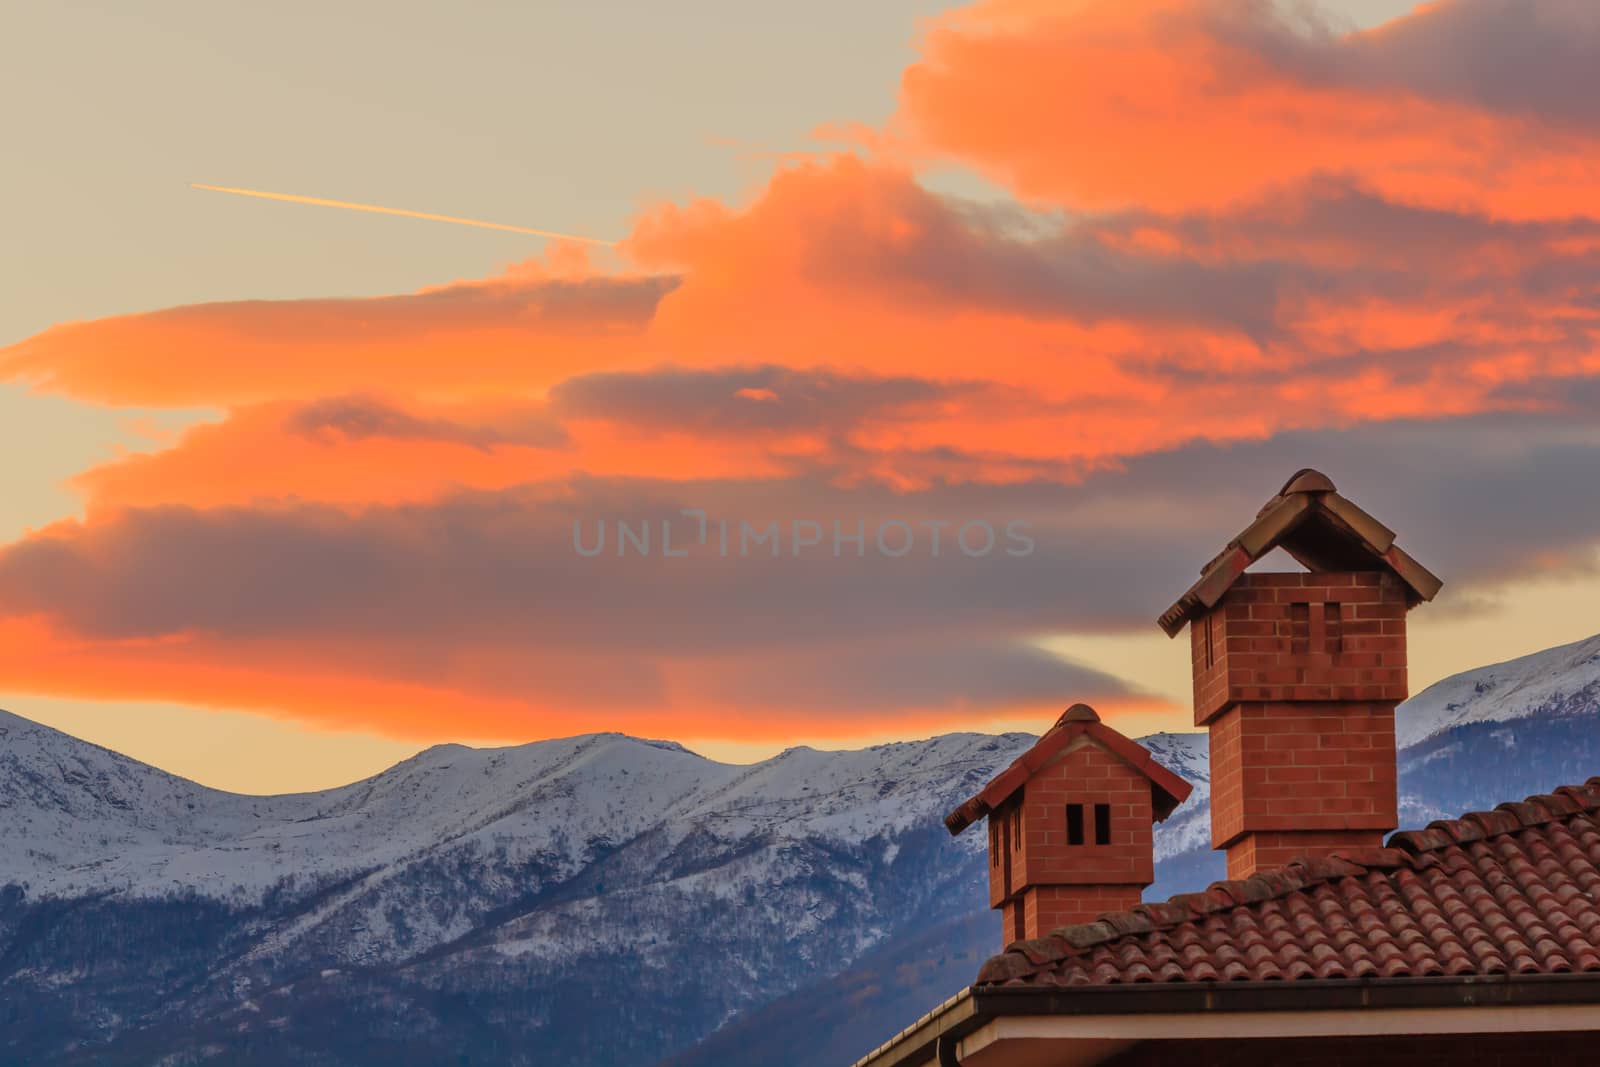 two chimneys of a house on the background of a sunset by moorea